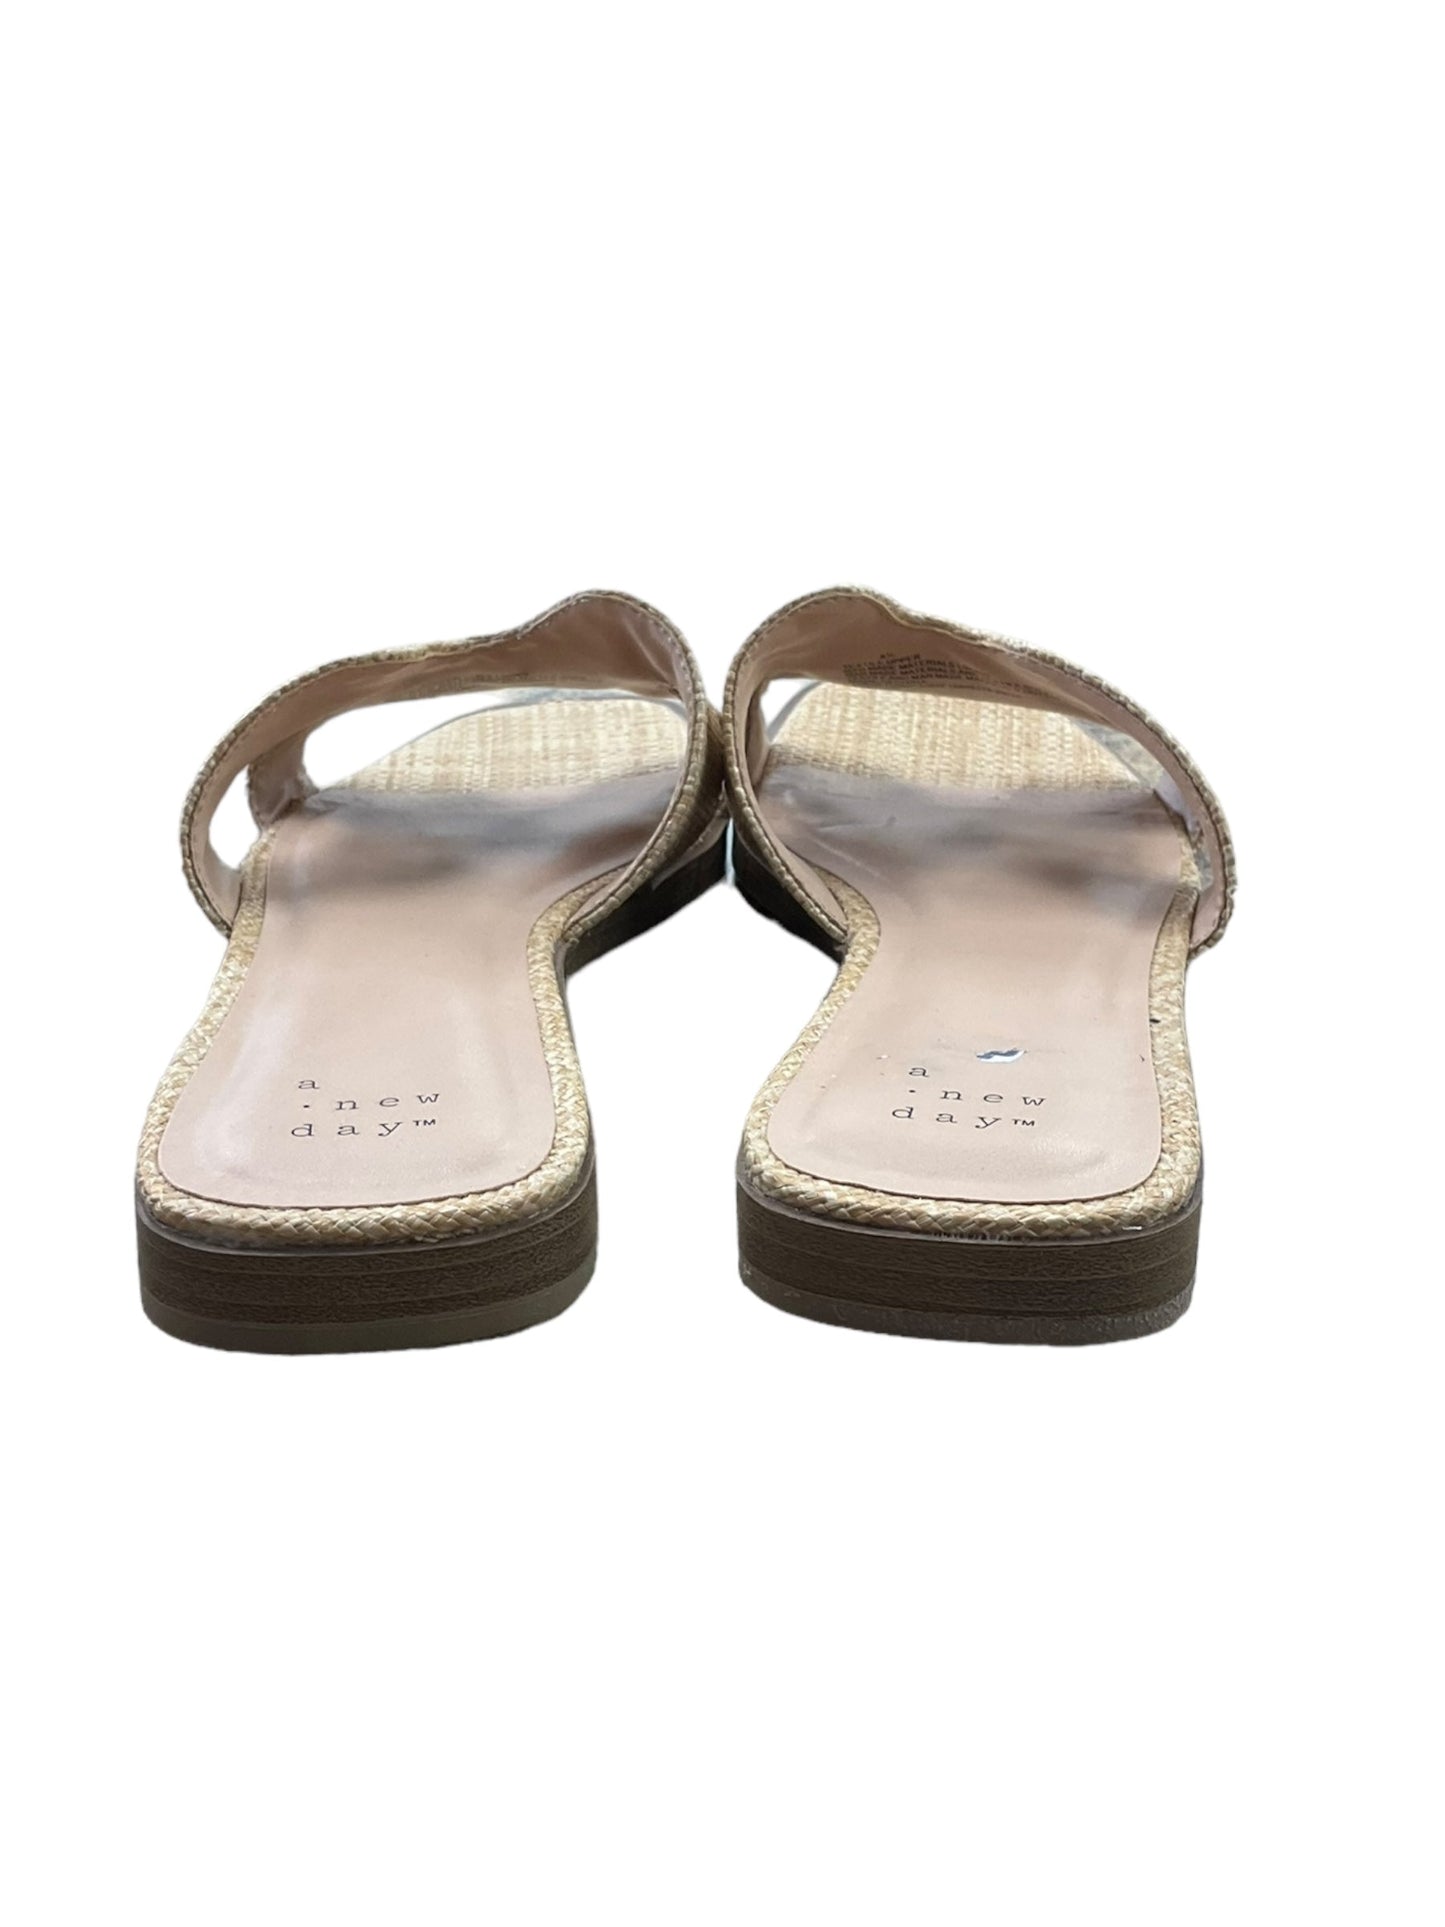 Beige Sandals Flats A New Day, Size 8.5